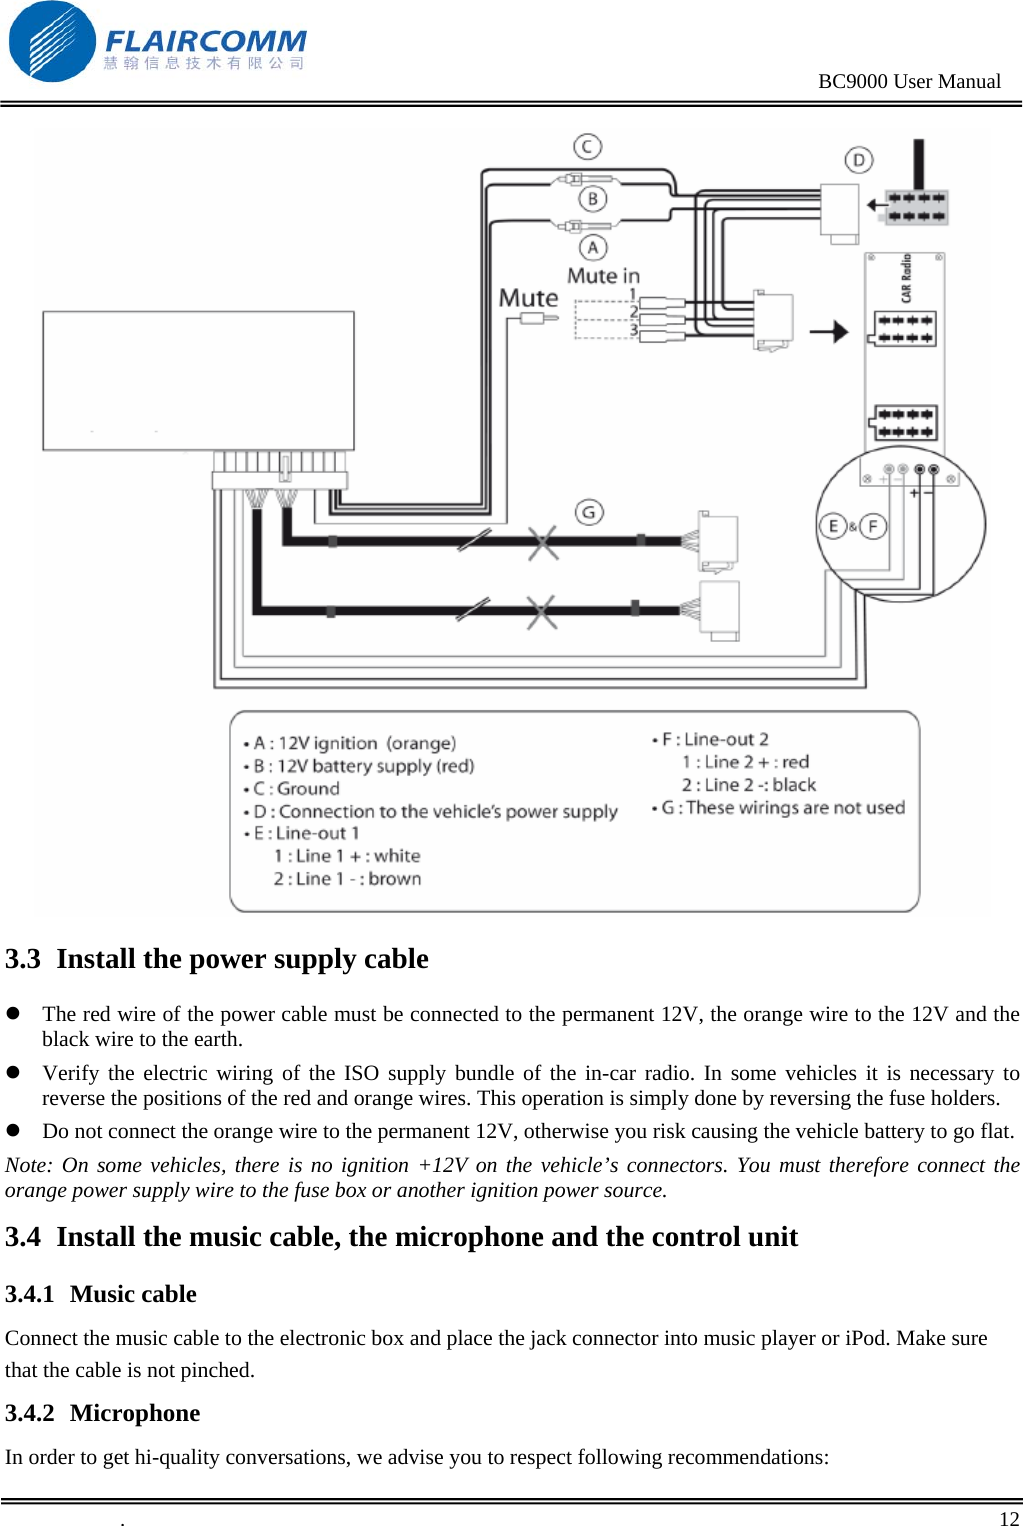                                                                                                BC9000 User Manual   3.3 Install the power supply cable z The red wire of the power cable must be connected to the permanent 12V, the orange wire to the 12V and the black wire to the earth. z Verify the electric wiring of the ISO supply bundle of the in-car radio. In some vehicles it is necessary to reverse the positions of the red and orange wires. This operation is simply done by reversing the fuse holders. z Do not connect the orange wire to the permanent 12V, otherwise you risk causing the vehicle battery to go flat. Note: On some vehicles, there is no ignition +12V on the vehicle’s connectors. You must therefore connect the orange power supply wire to the fuse box or another ignition power source. 3.4 Install the music cable, the microphone and the control unit 3.4.1 Music cable Connect the music cable to the electronic box and place the jack connector into music player or iPod. Make sure that the cable is not pinched. 3.4.2 Microphone In order to get hi-quality conversations, we advise you to respect following recommendations:  .       12    